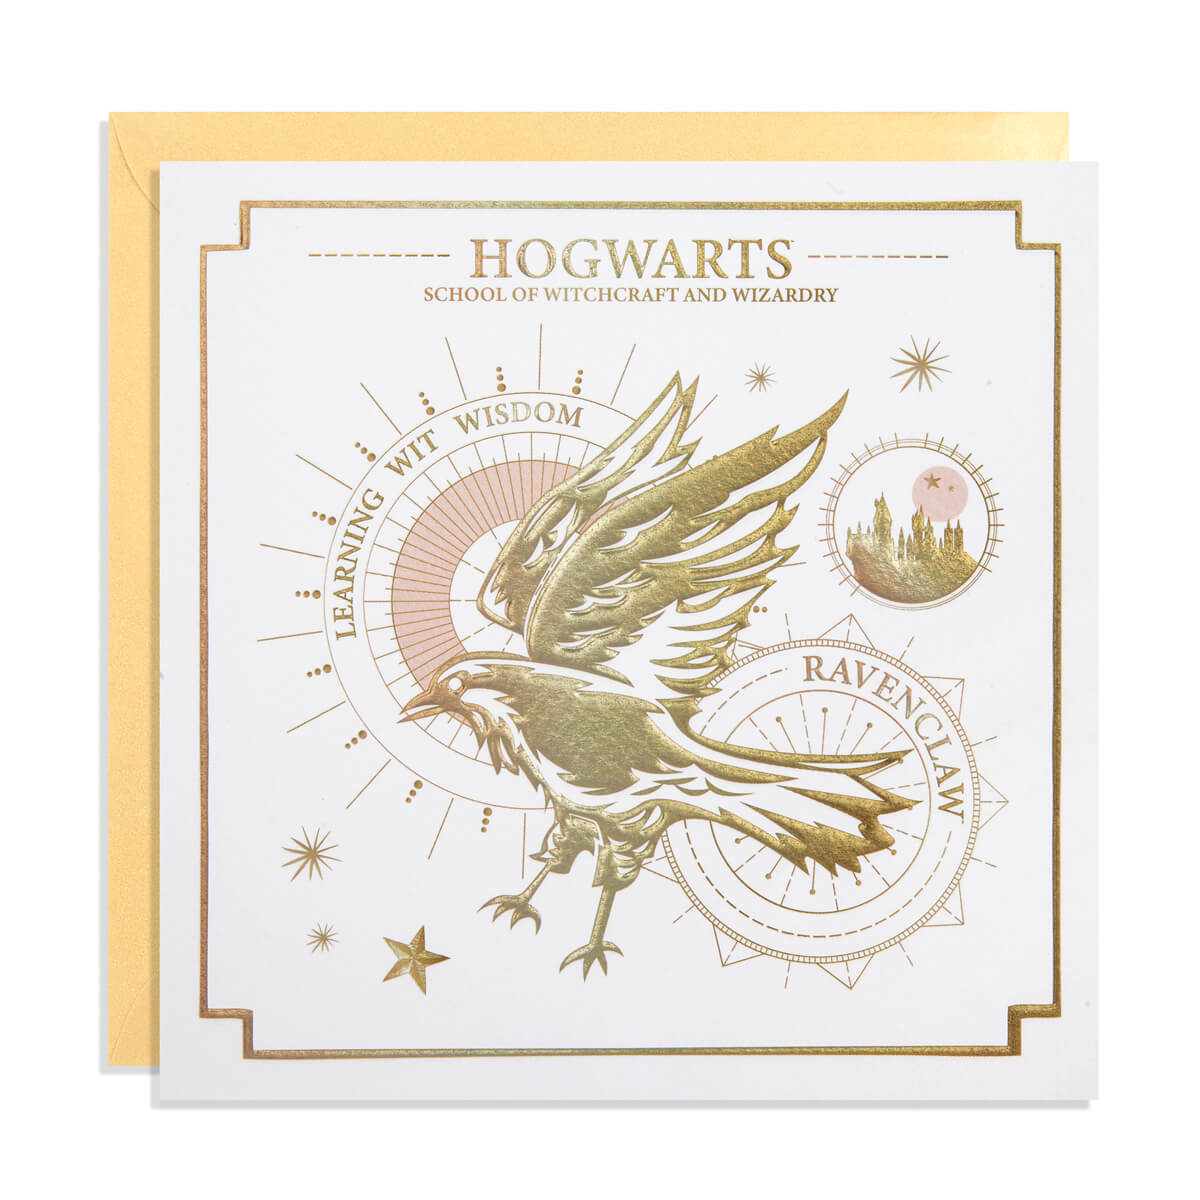 Harry Potter Ravenclaw Greetings Card - White Card with Gold Embossing -  photographed on a white background with gold envelope